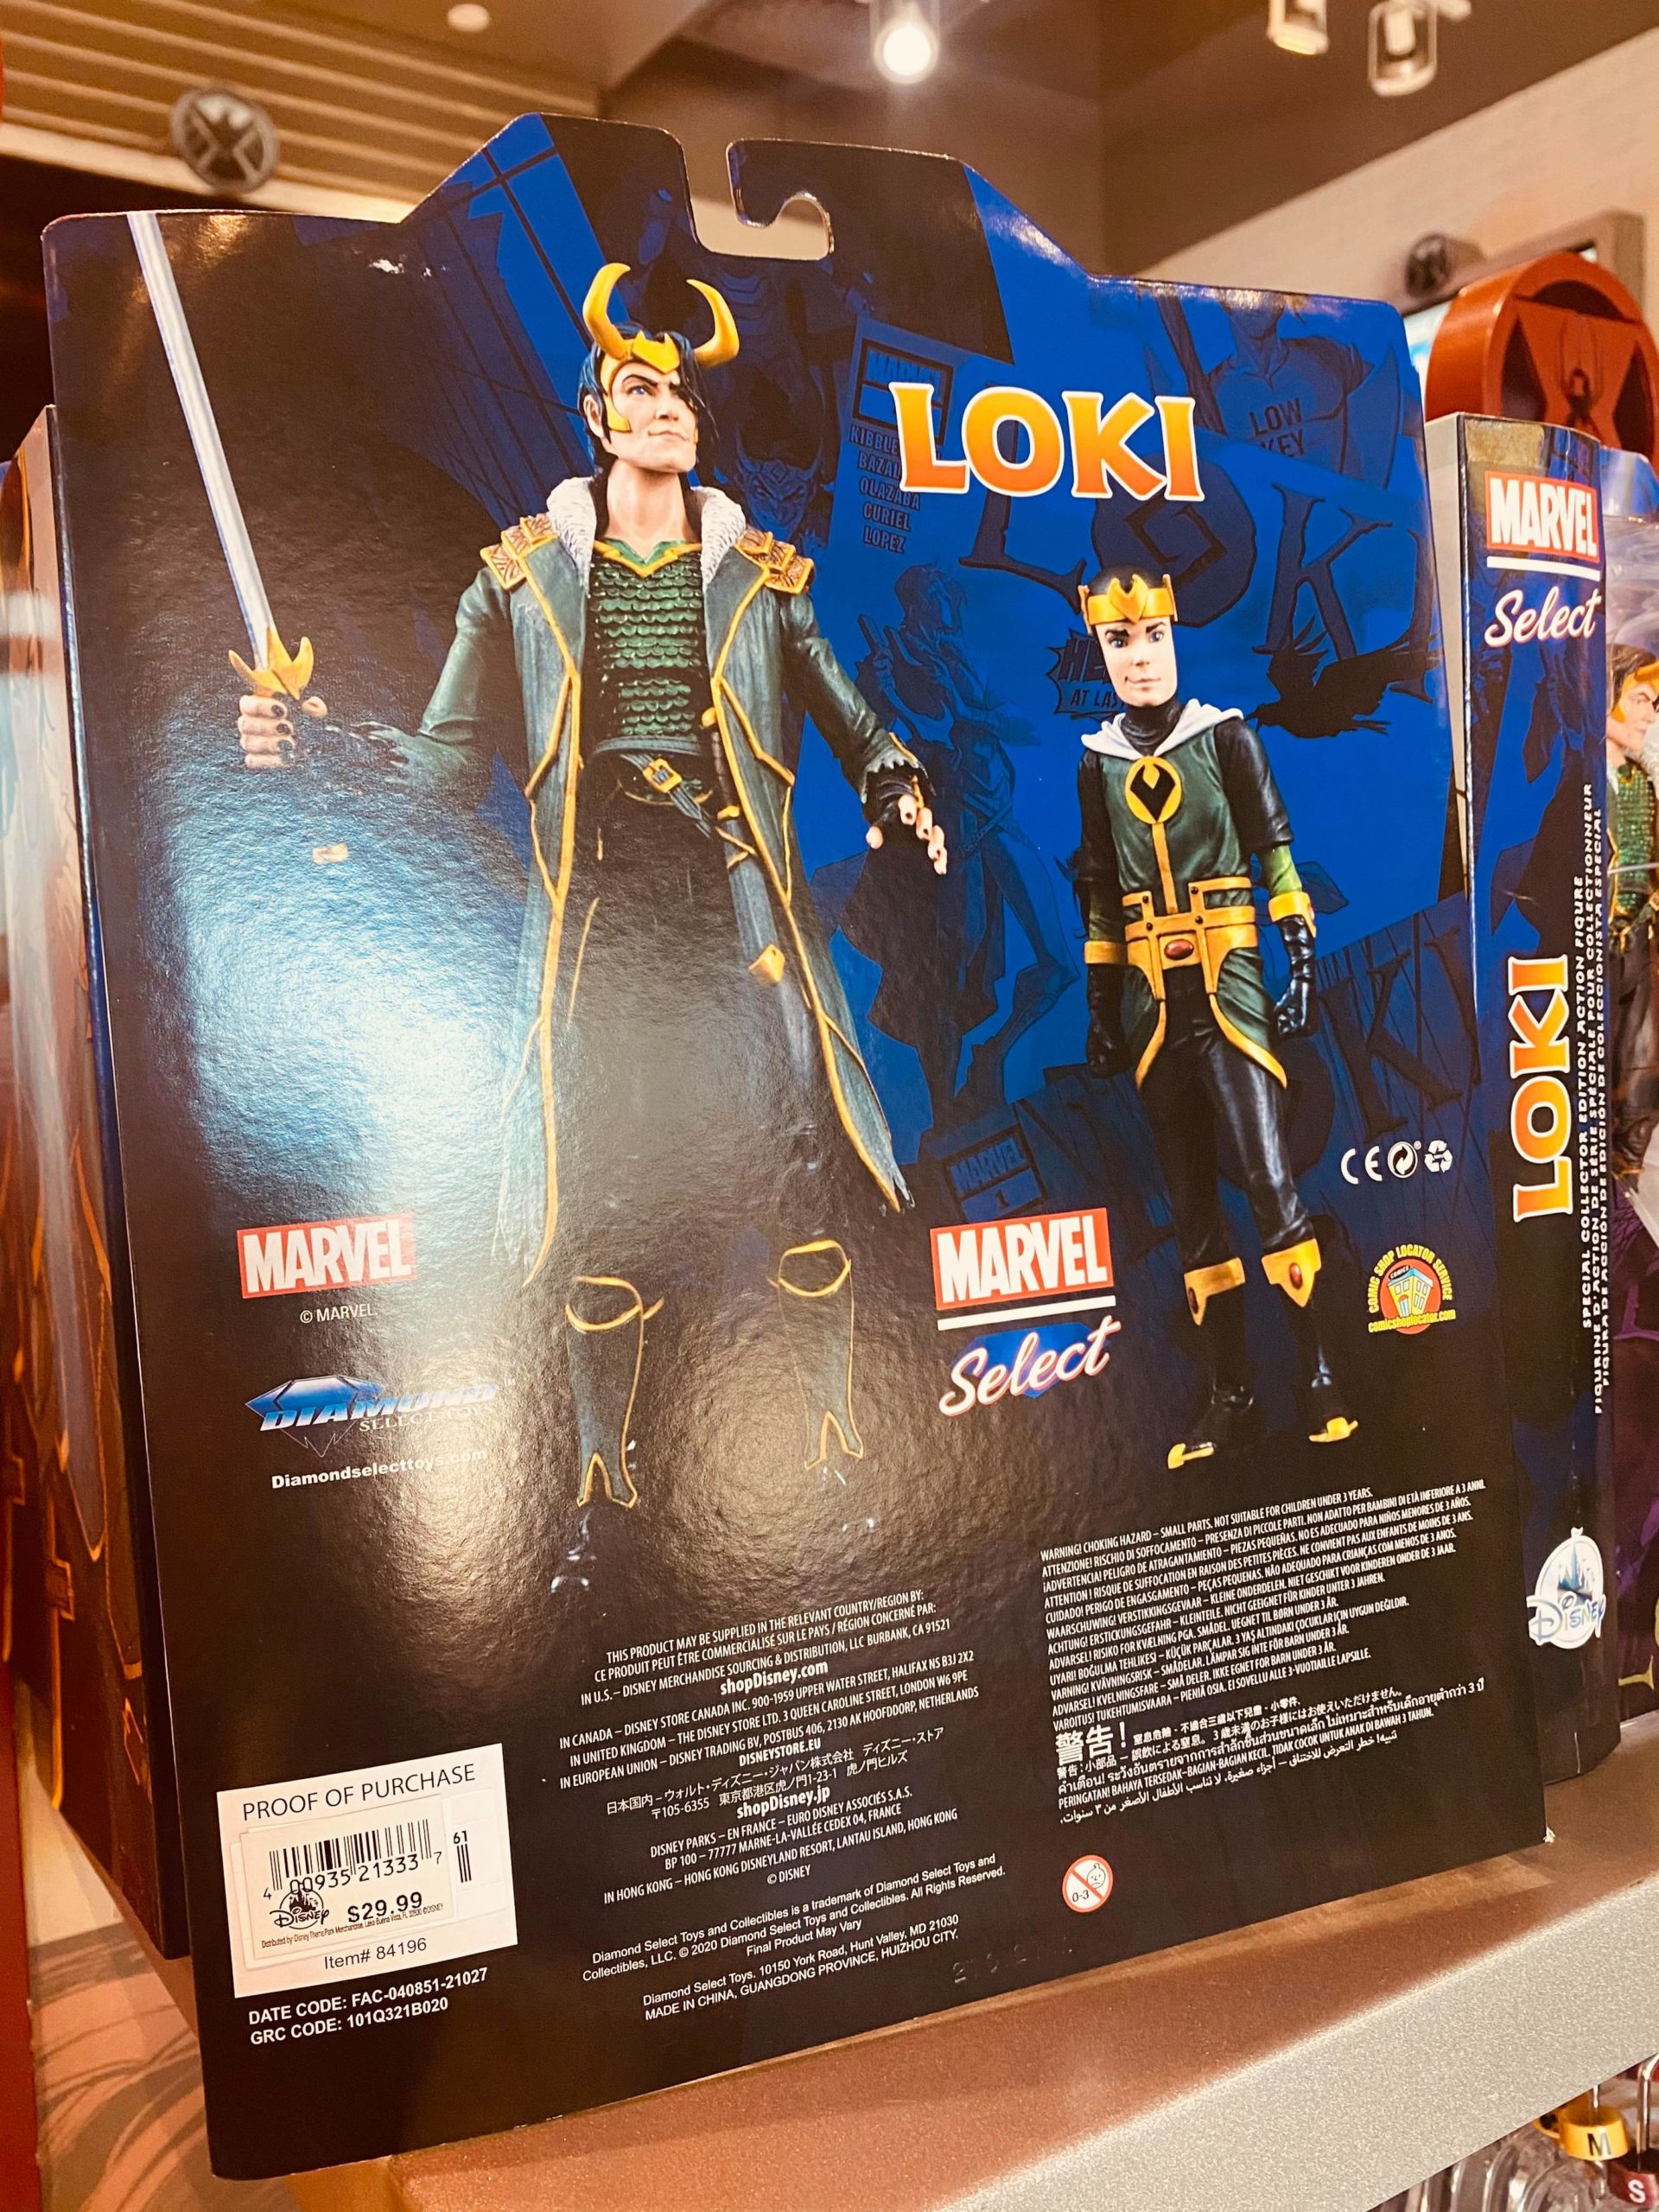 Loki Special Collector Edition Action Figure Set – Marvel Select by Diamond Back of Box